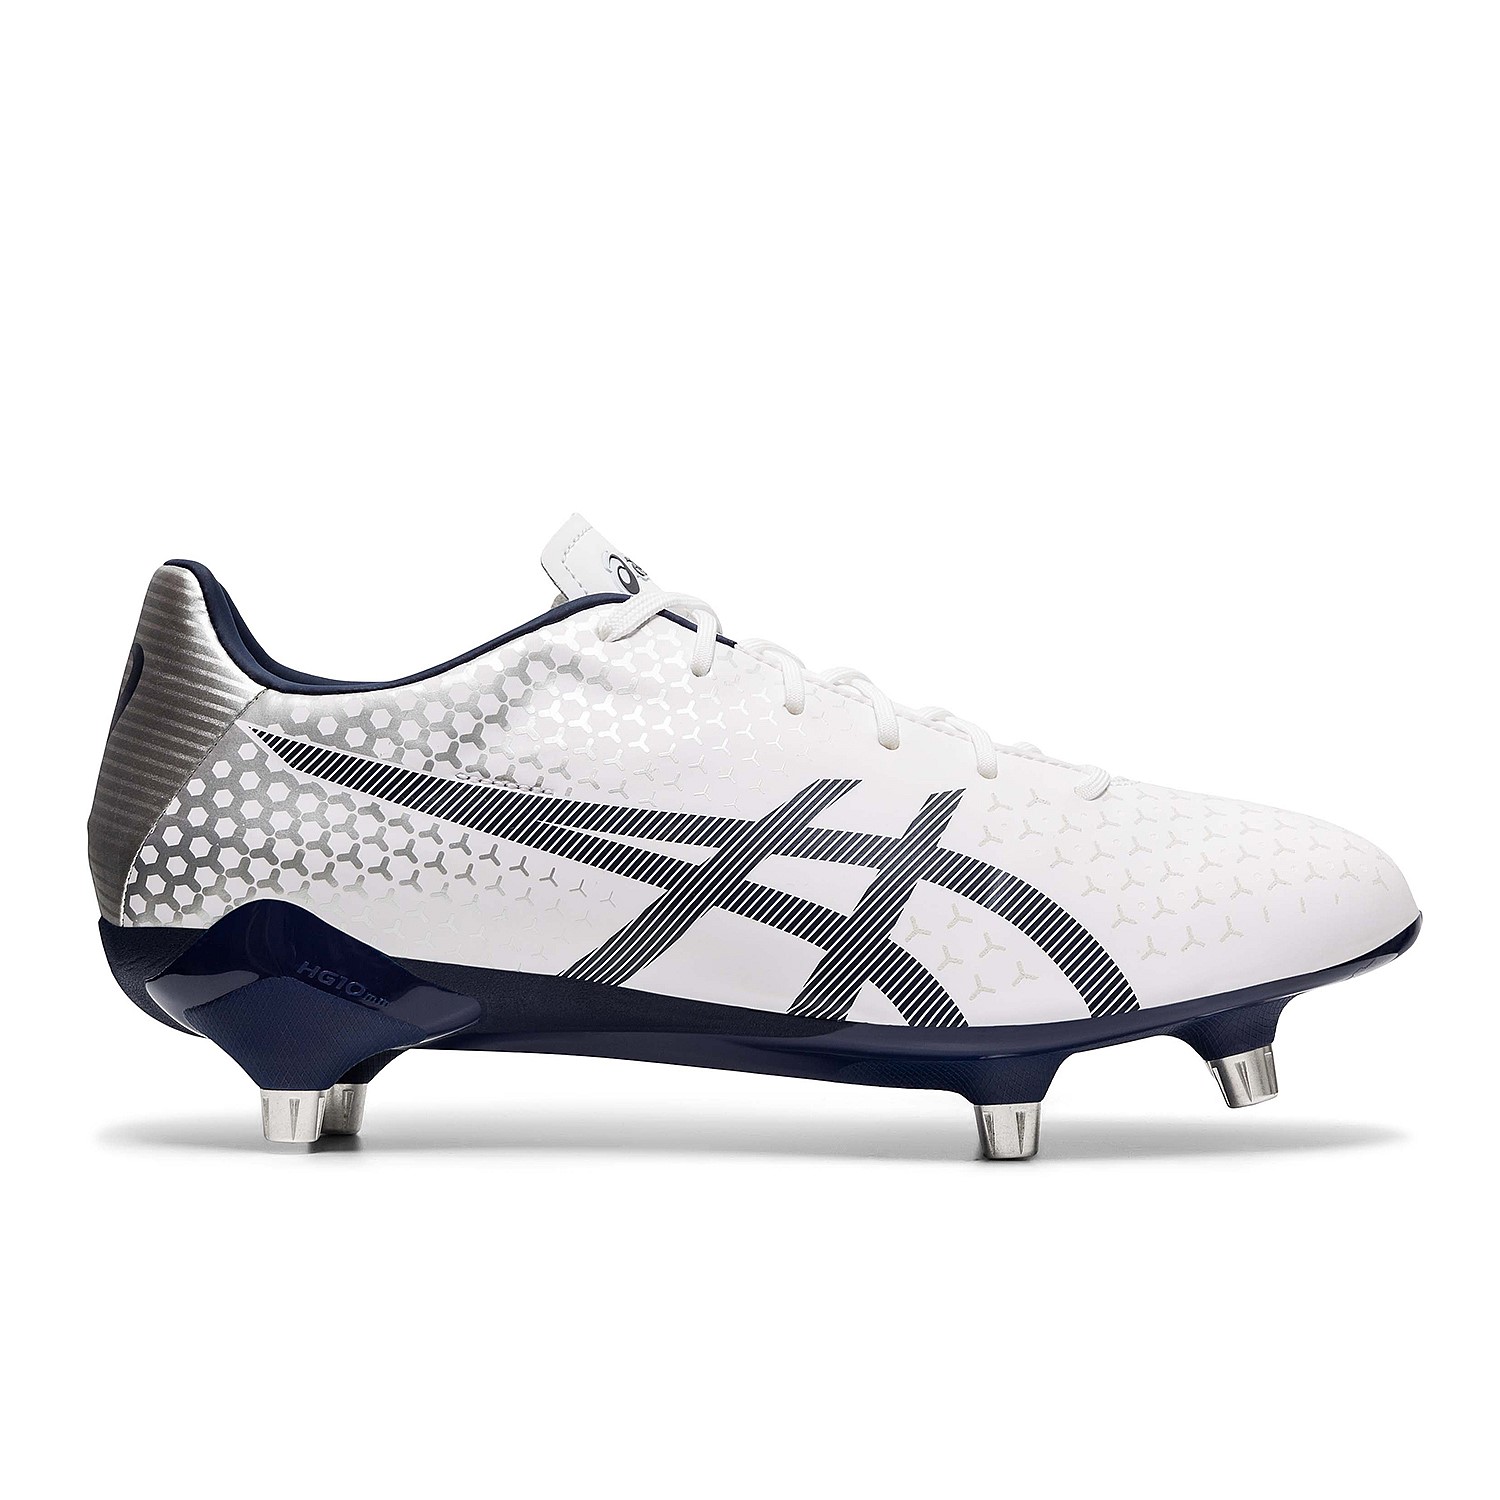 asics menace rugby boots